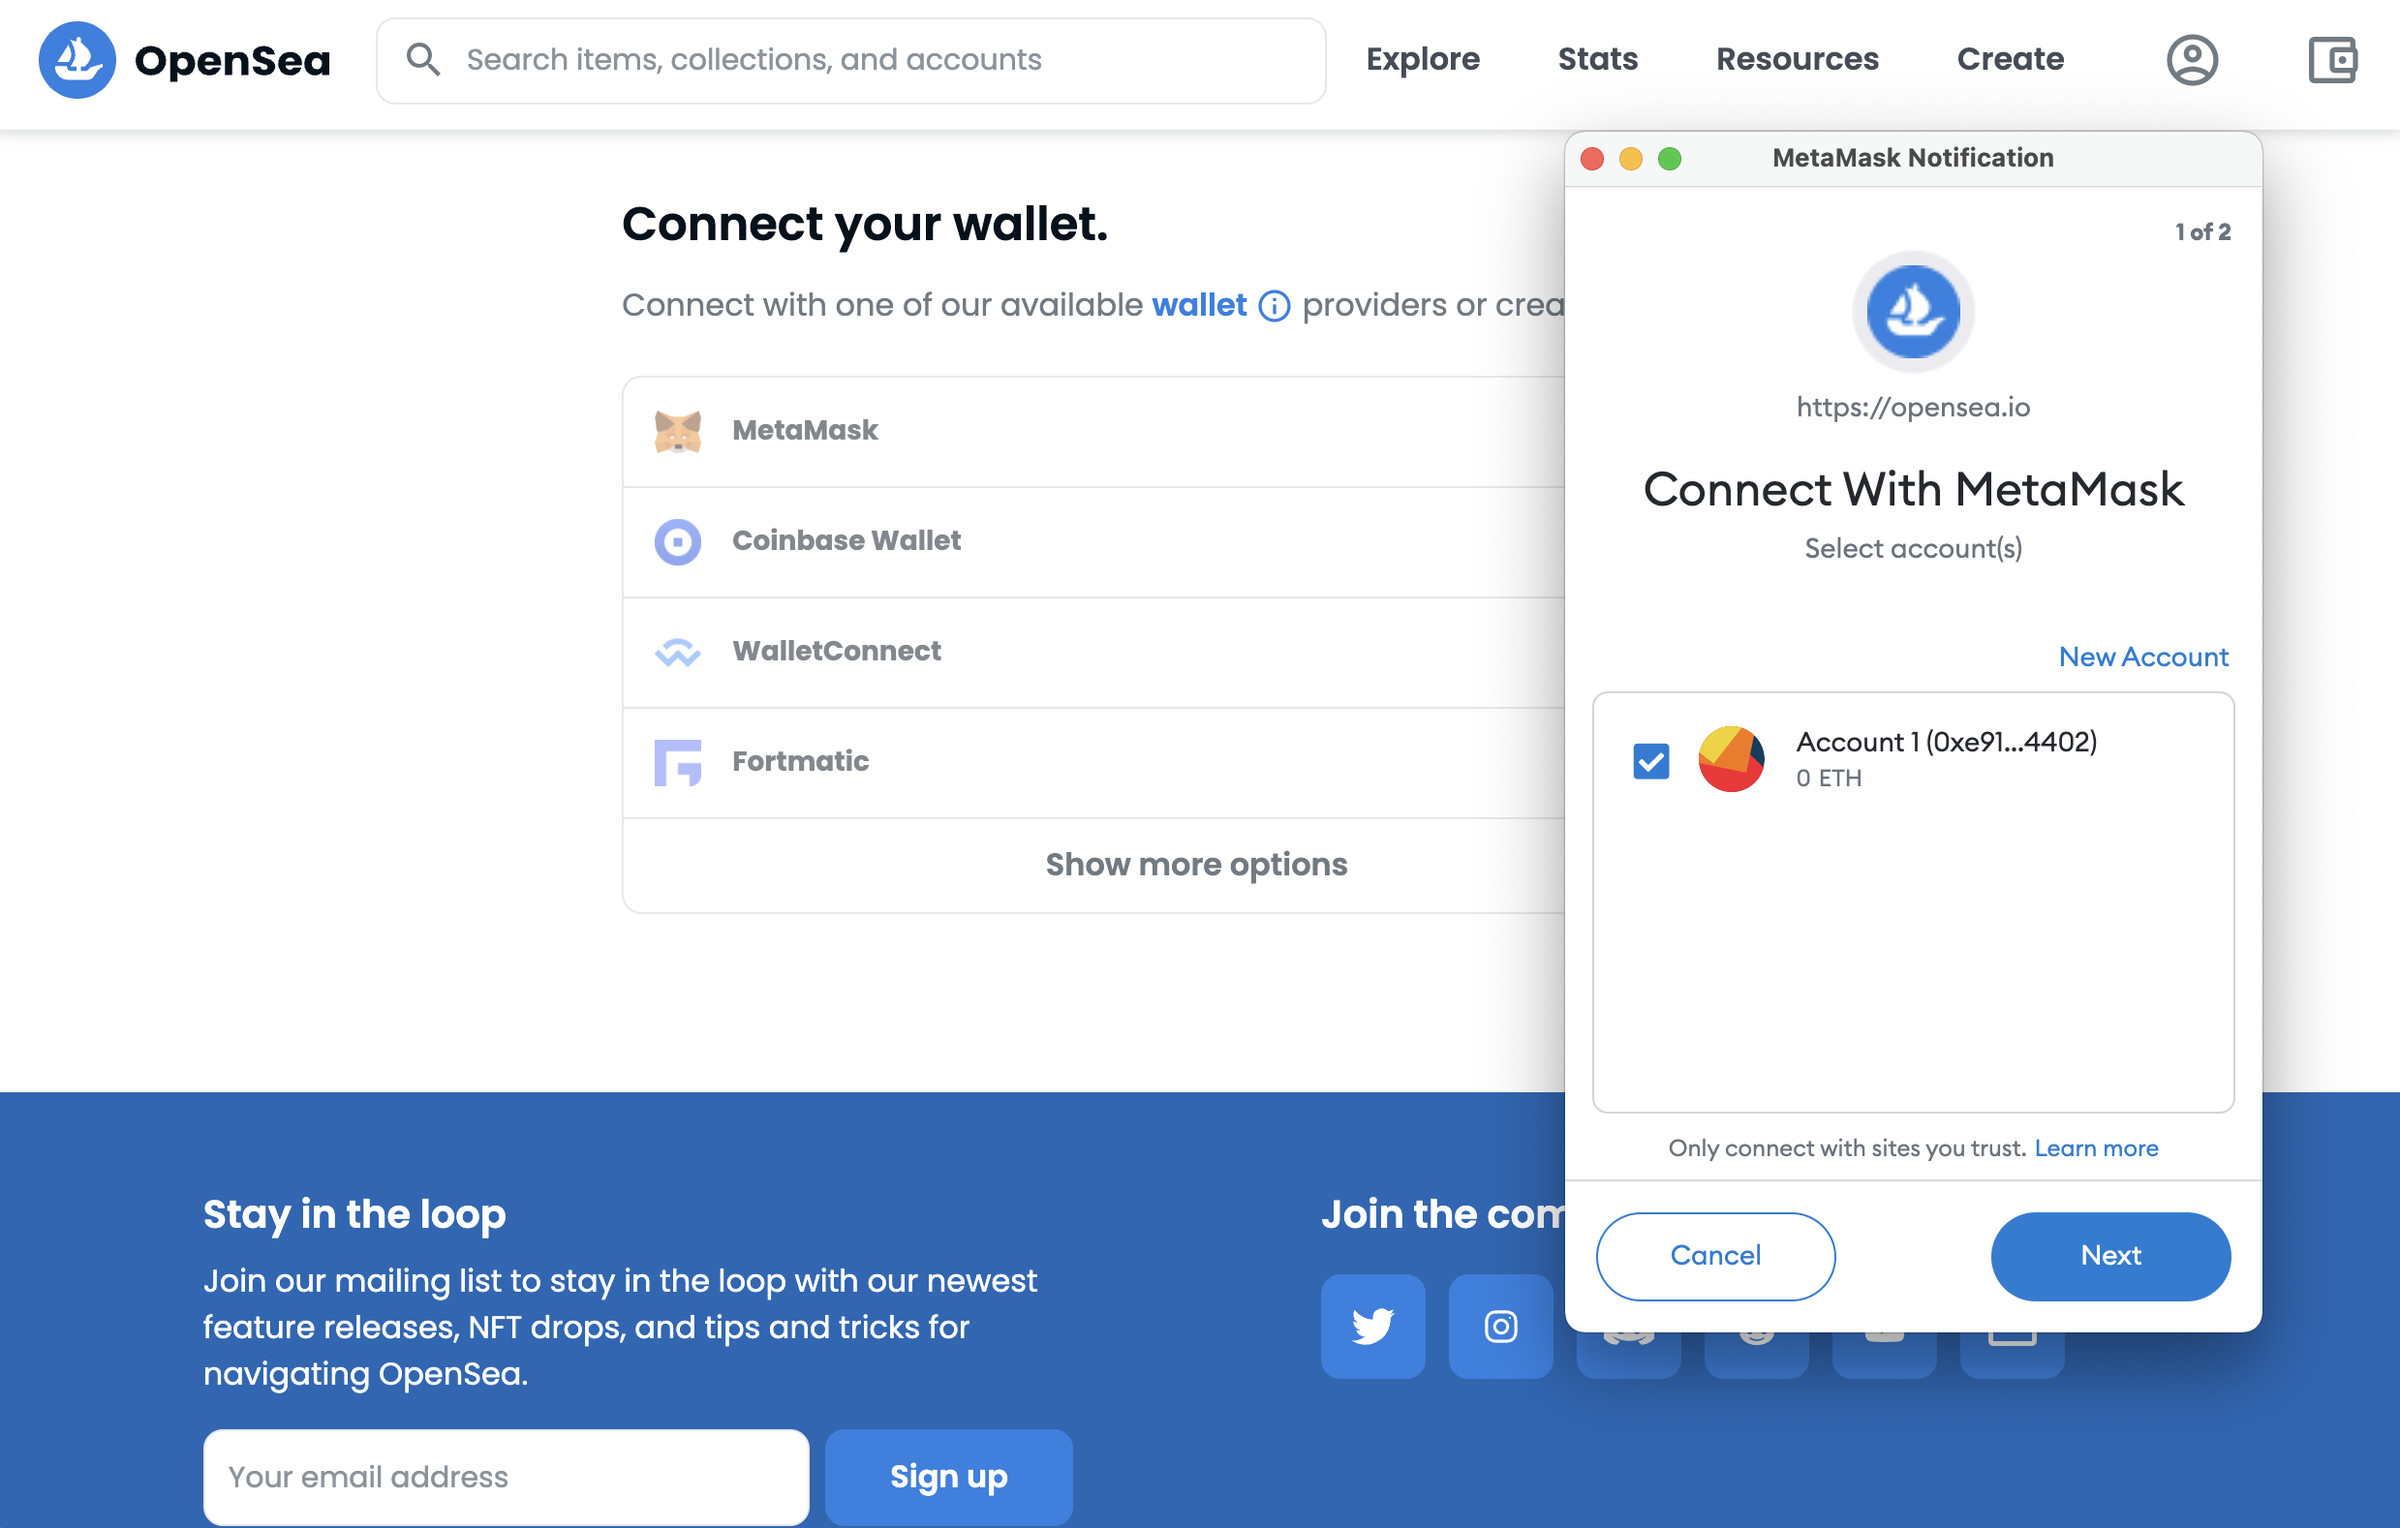 Connecting an account with MetaMask is simple if you have the browser extension installed.